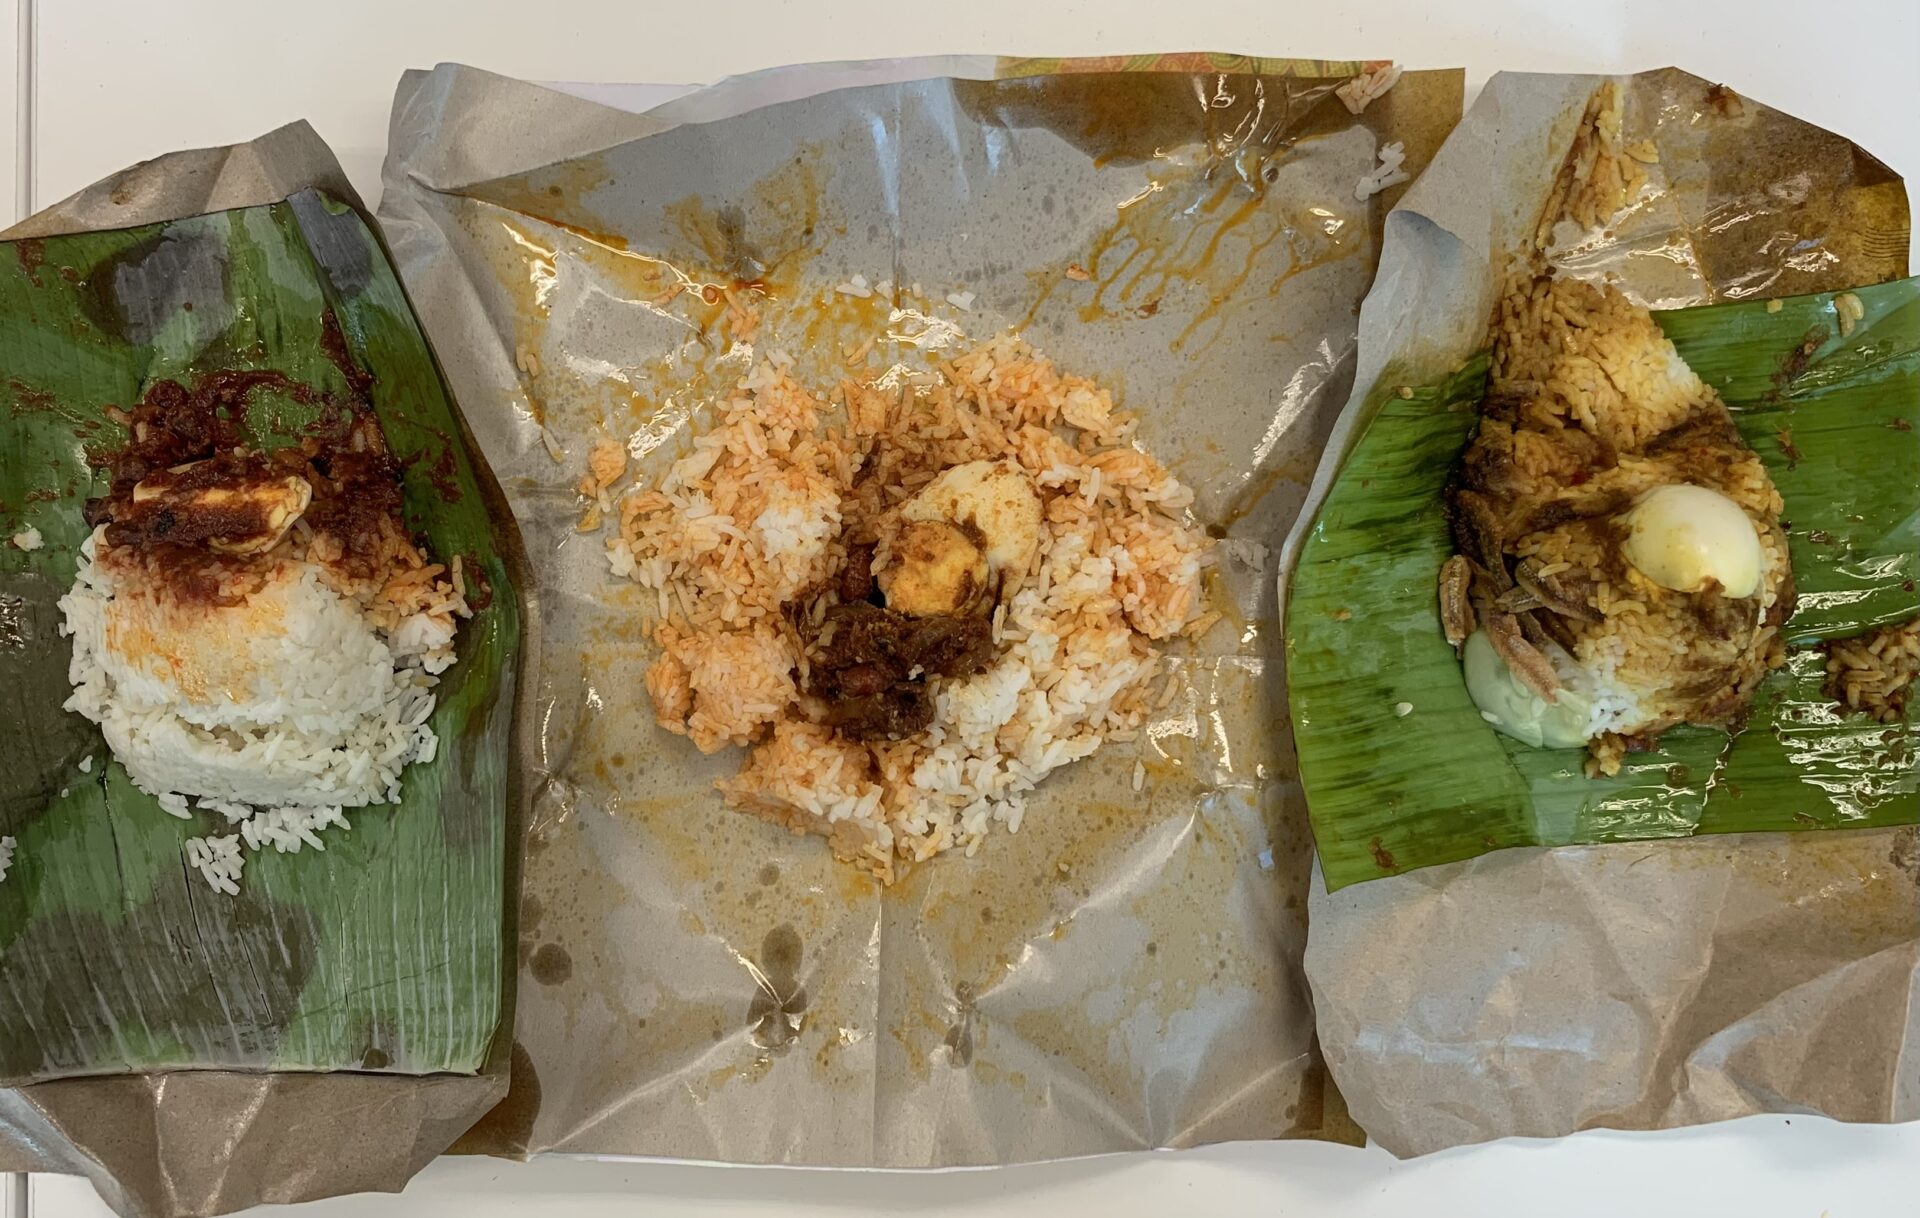 All three packets of open nasi lemak